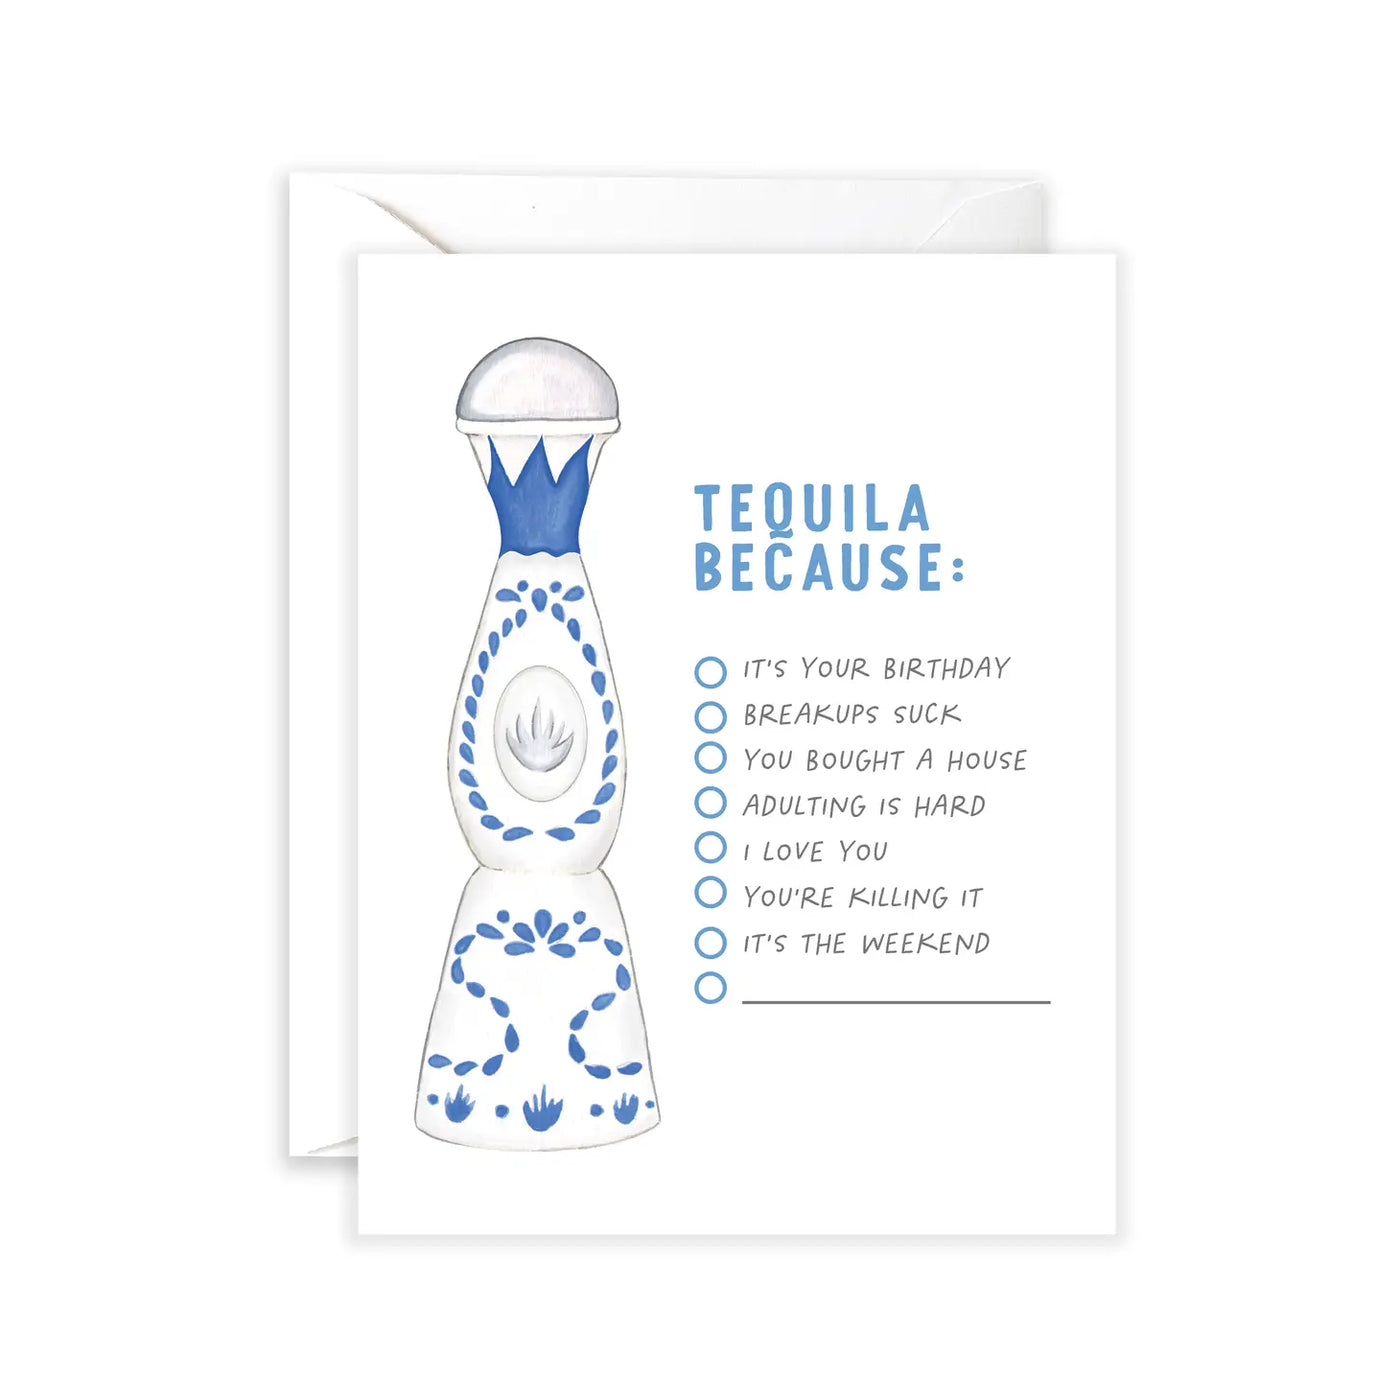 White card with a blue and white tequila bottle with the phrase Tequila Because: then features a list of occasions to pick from.